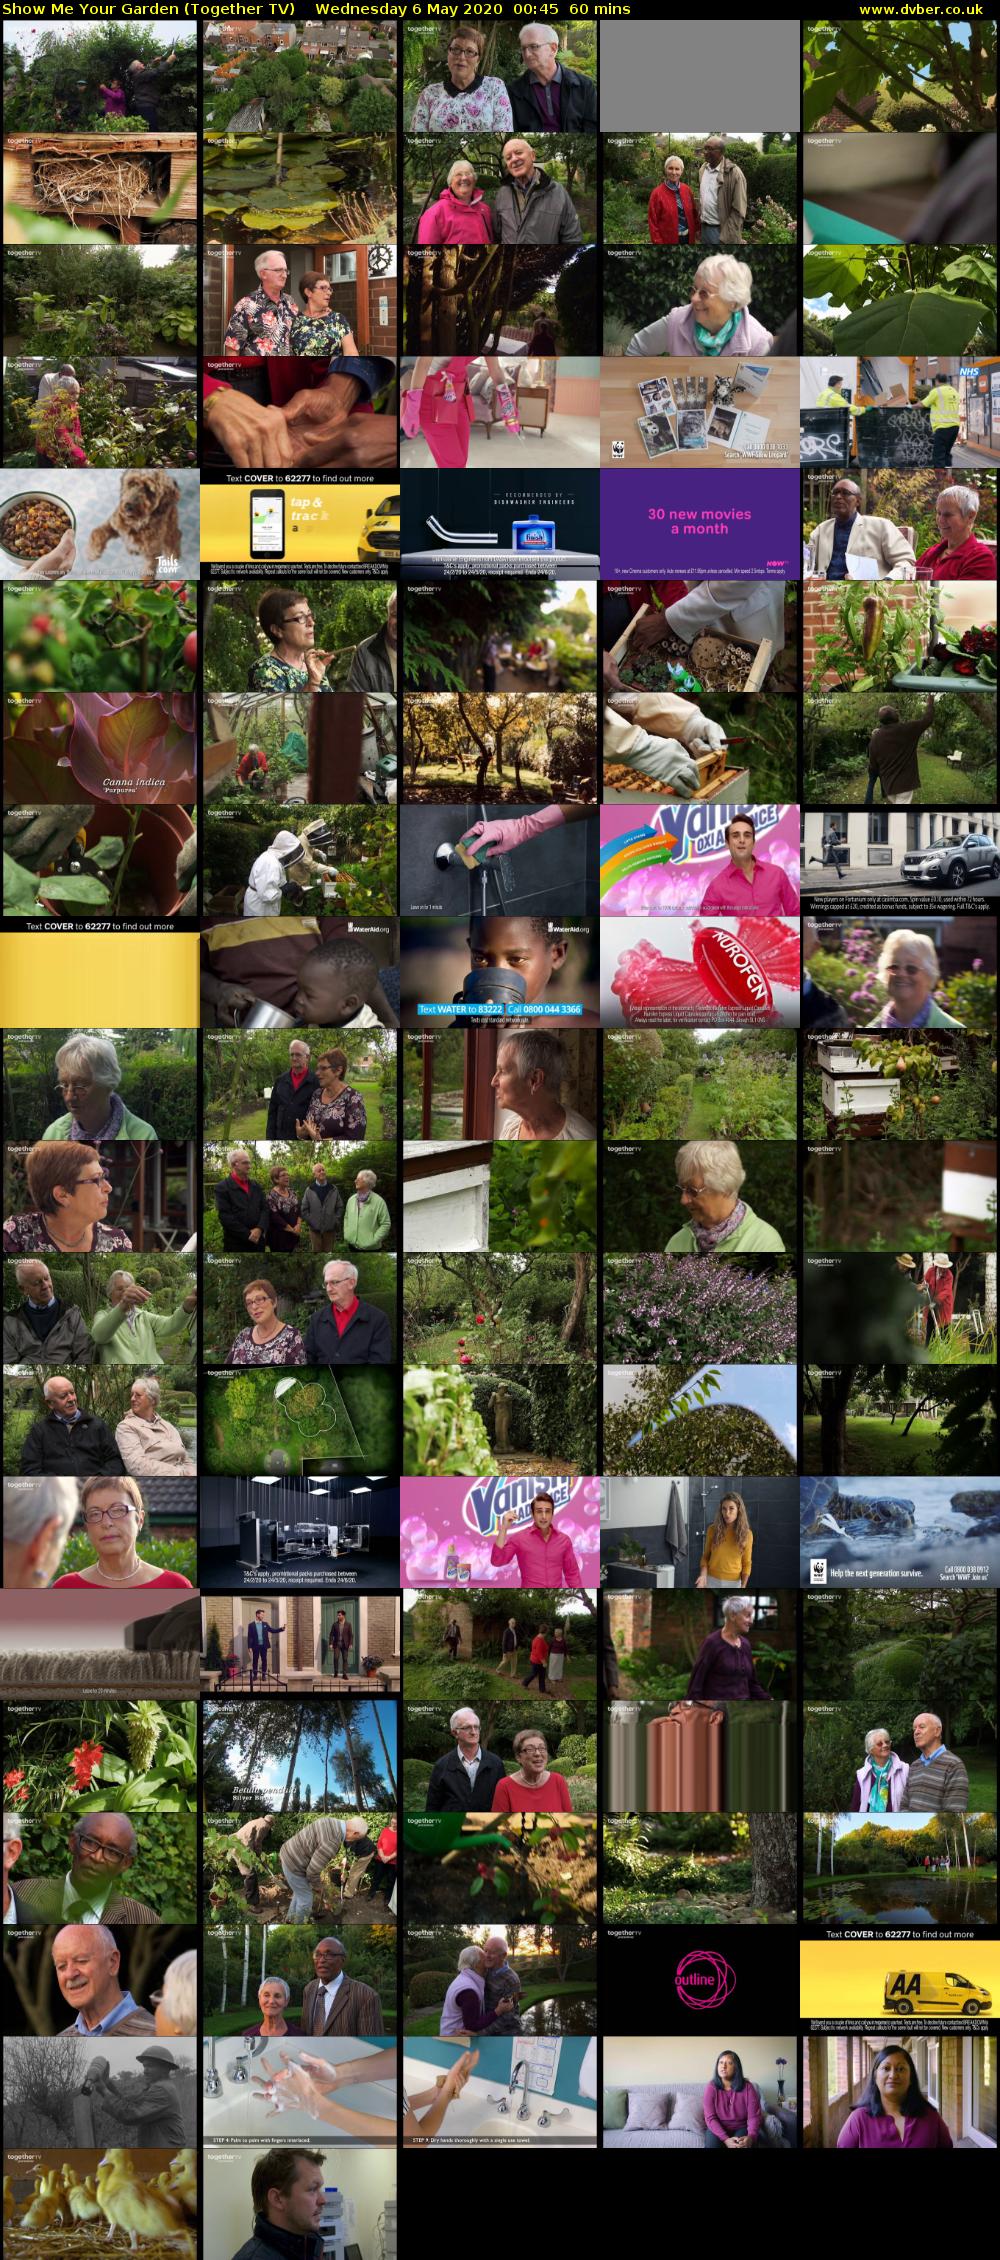 Show Me Your Garden (Together TV) Wednesday 6 May 2020 00:45 - 01:45